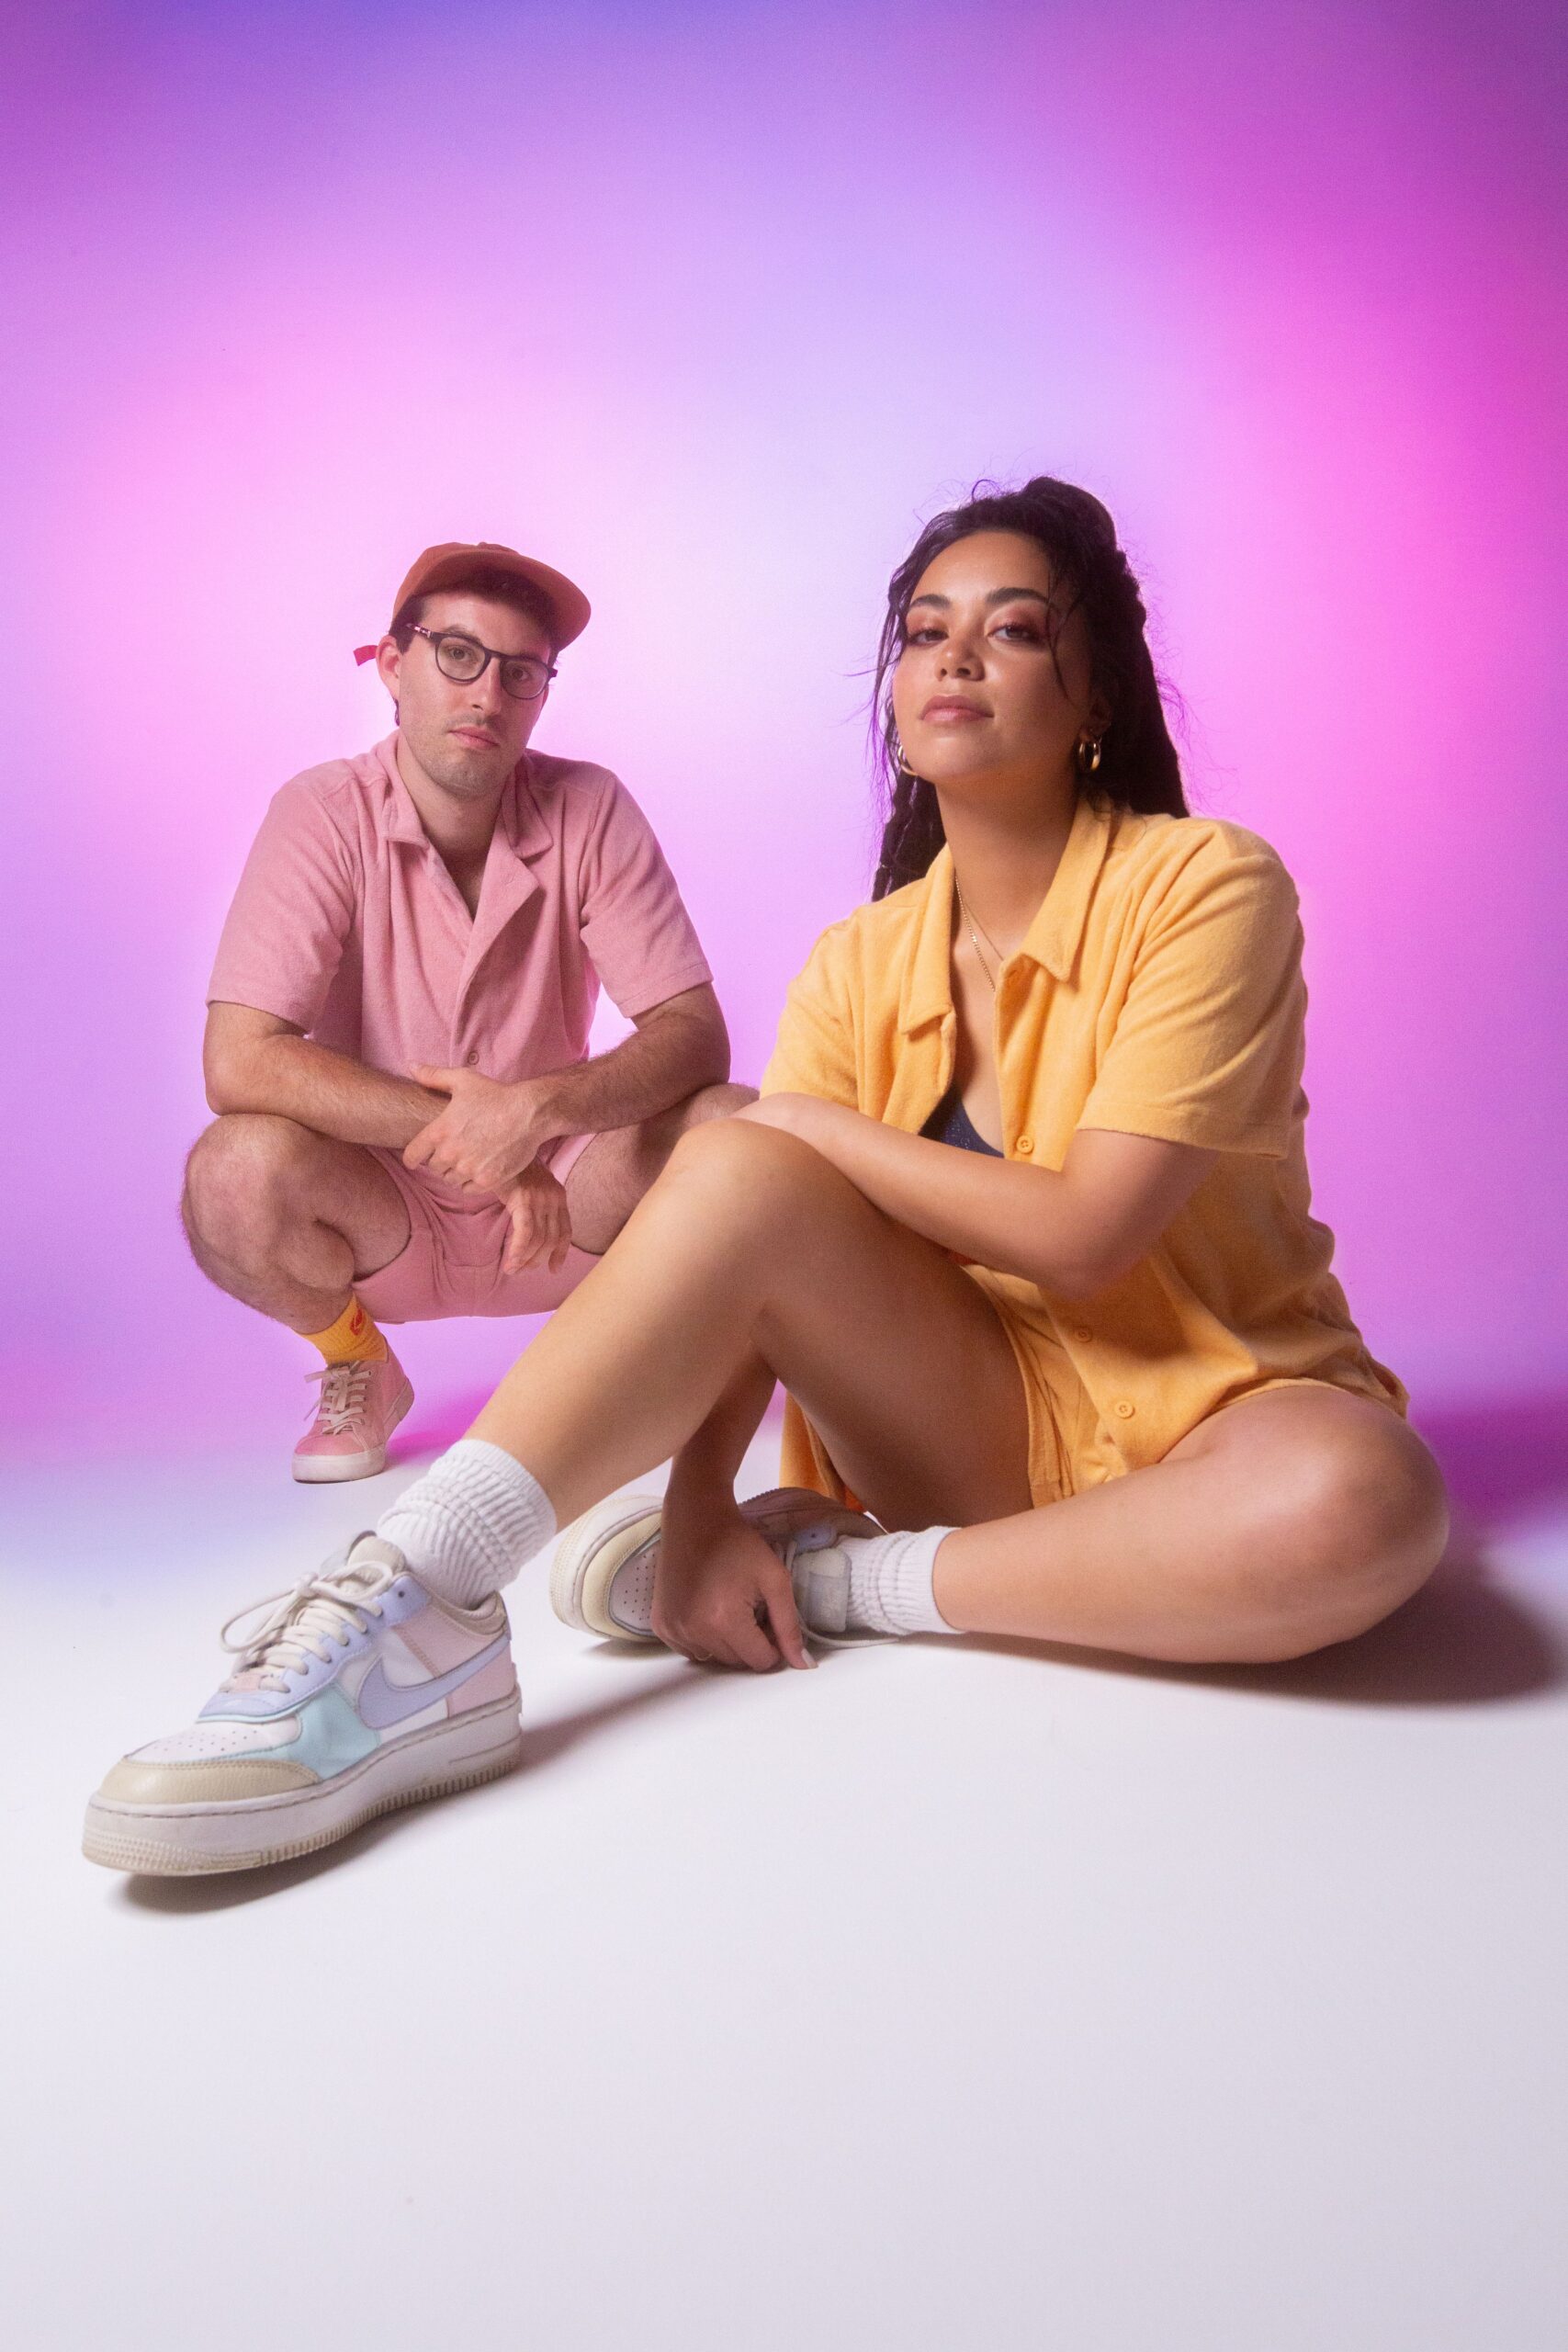 BESO PALMA x RISSA RELEASES ENERGETIC NEW SINGLE “EGO”